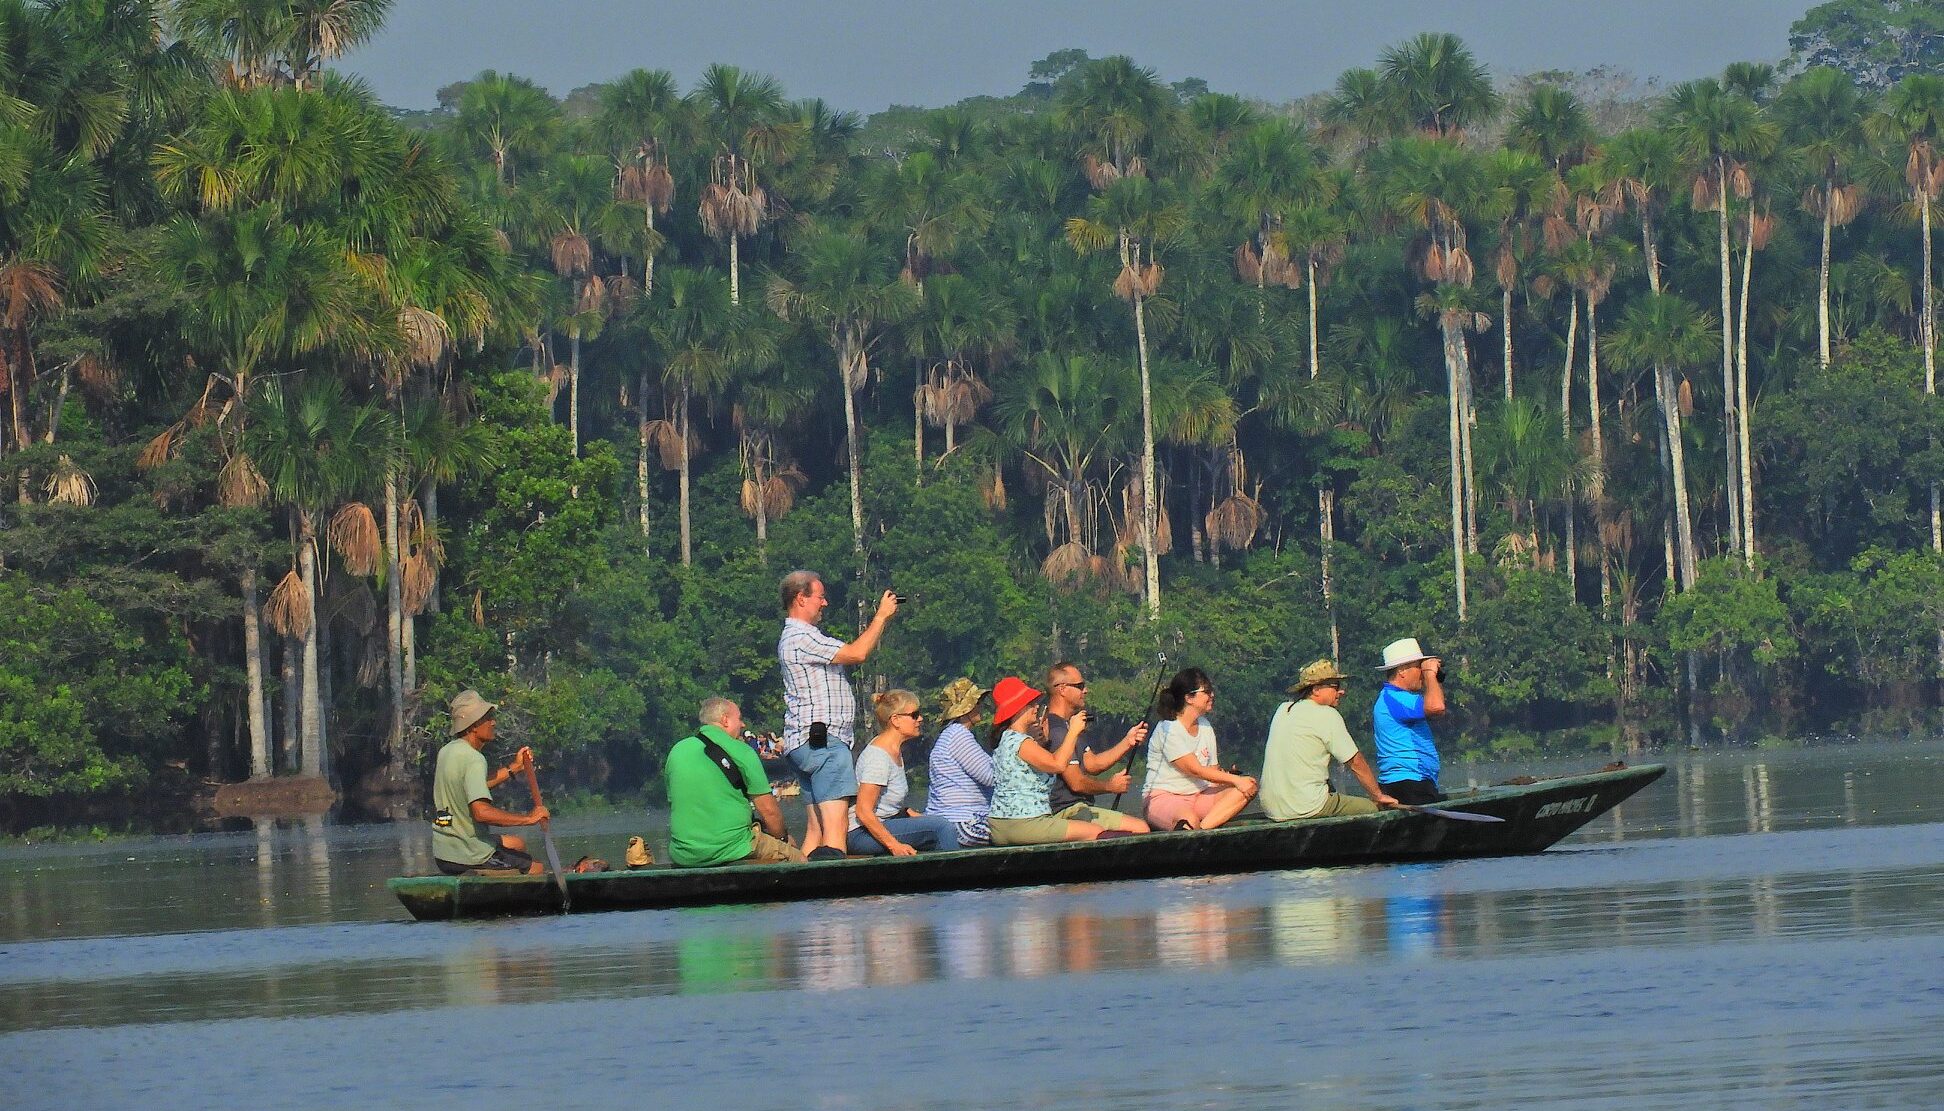 A group of travelers gliding along the Amazon River in a traditional wooden gondola in Peru, immersing themselves in the pristine natural beauty of the rainforest.